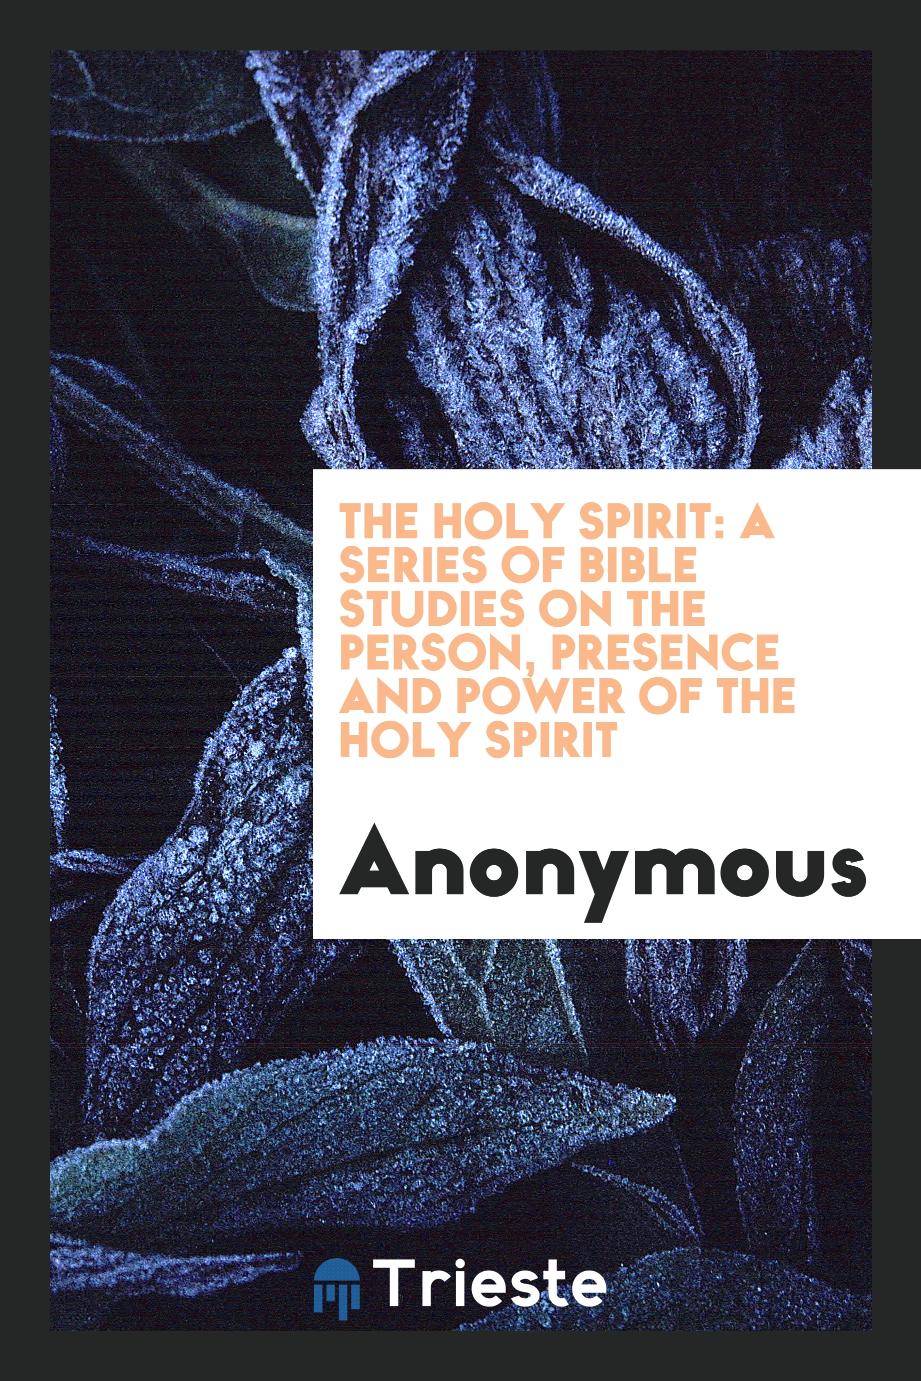 The Holy Spirit: a series of Bible studies on the person, presence and power of the Holy Spirit